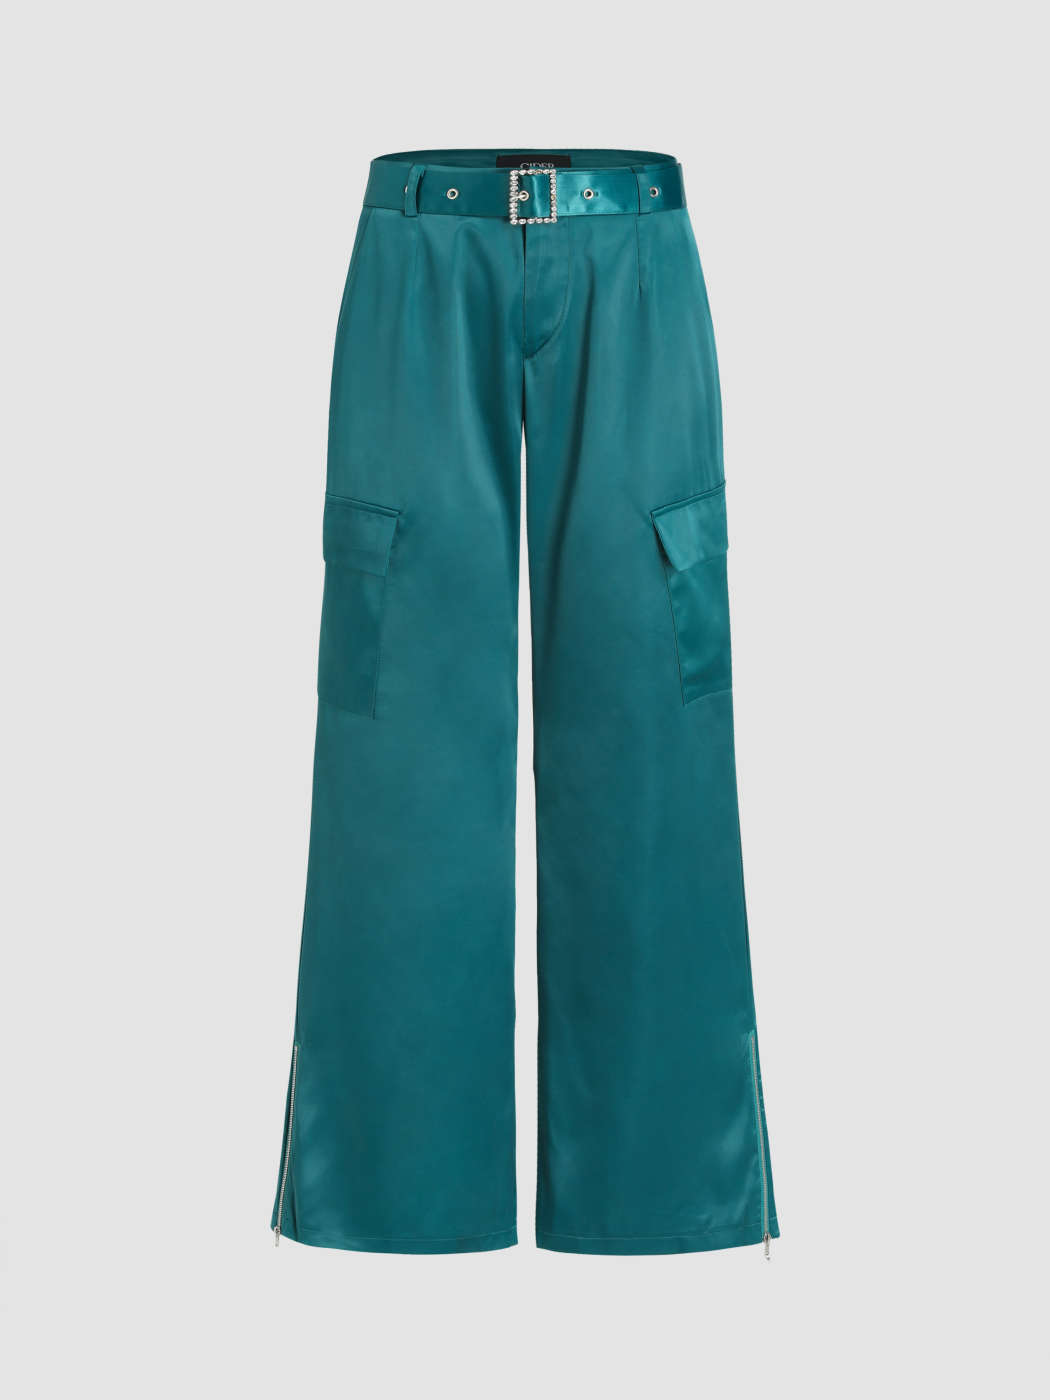 Got to Cargo Belted Satin Pants